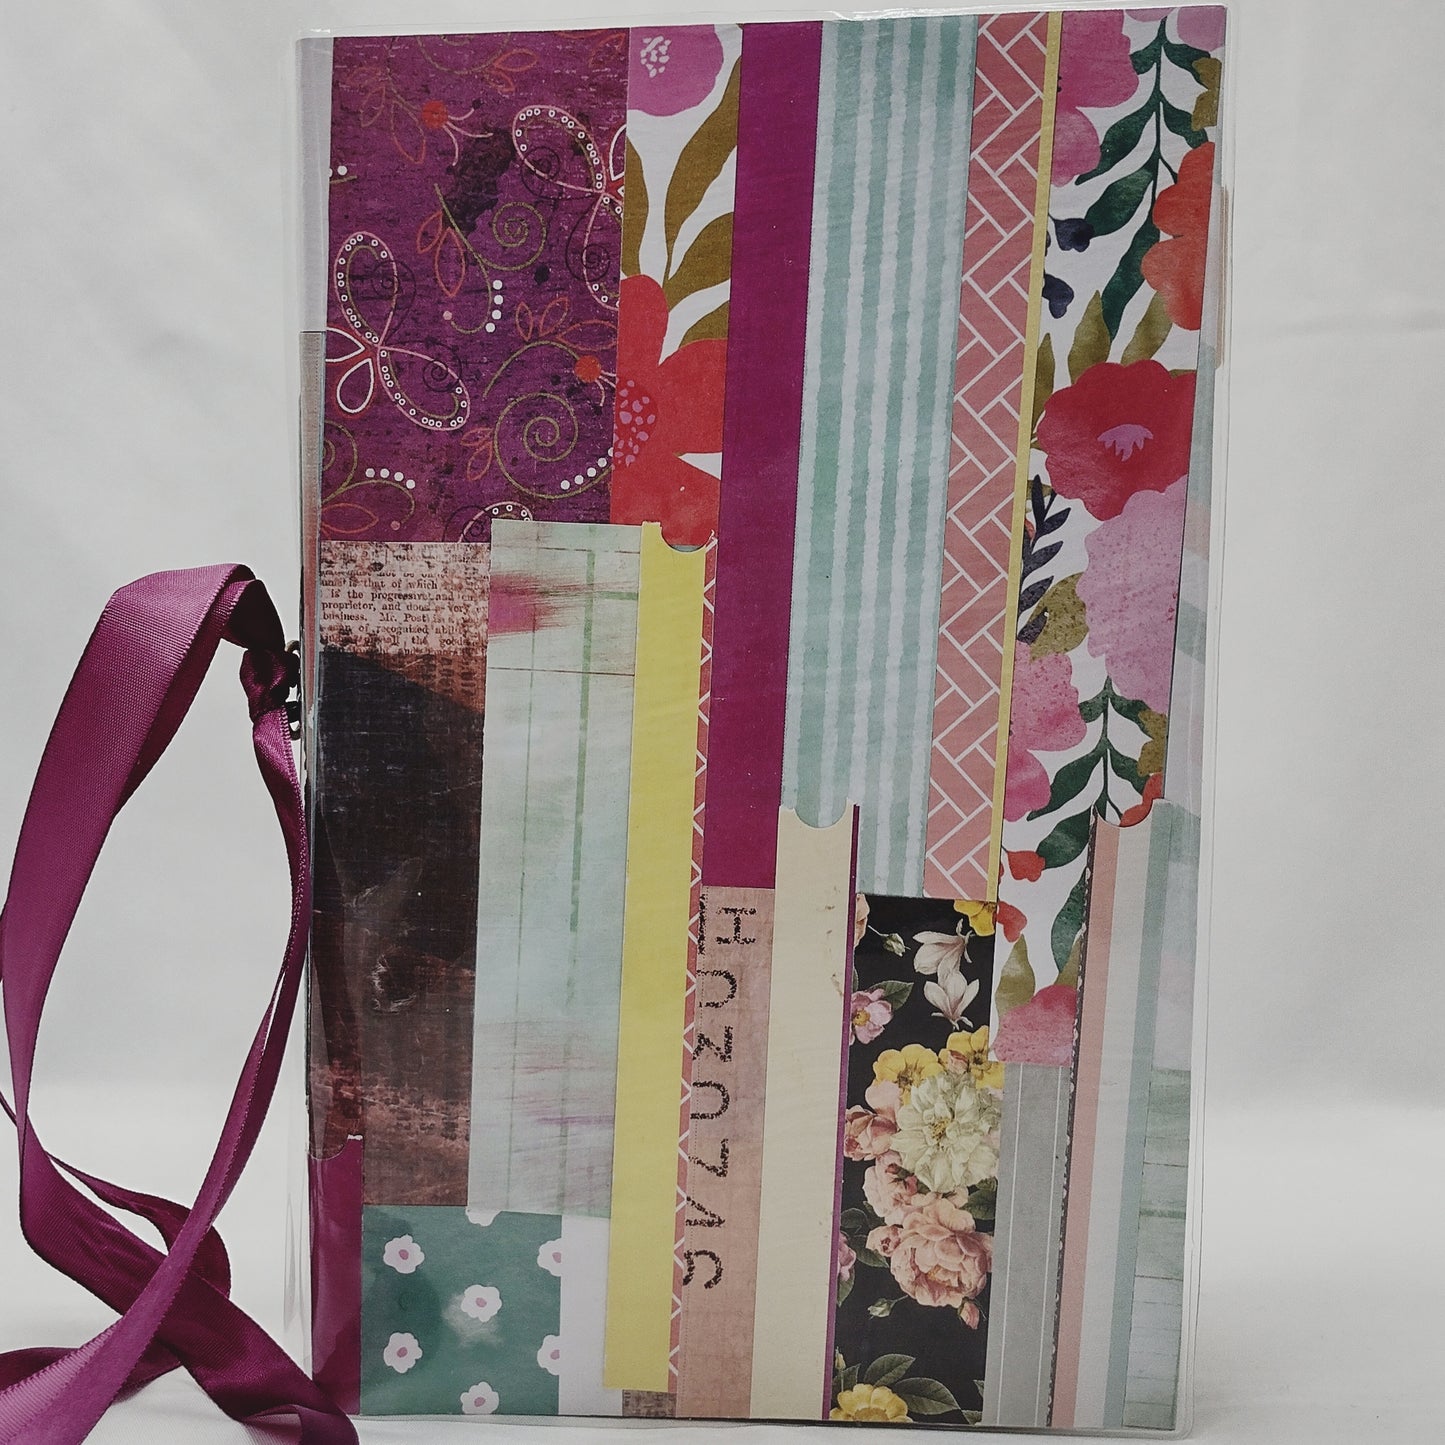 Junk Journal with Protective Cover, Handmade Mixed Media Journal